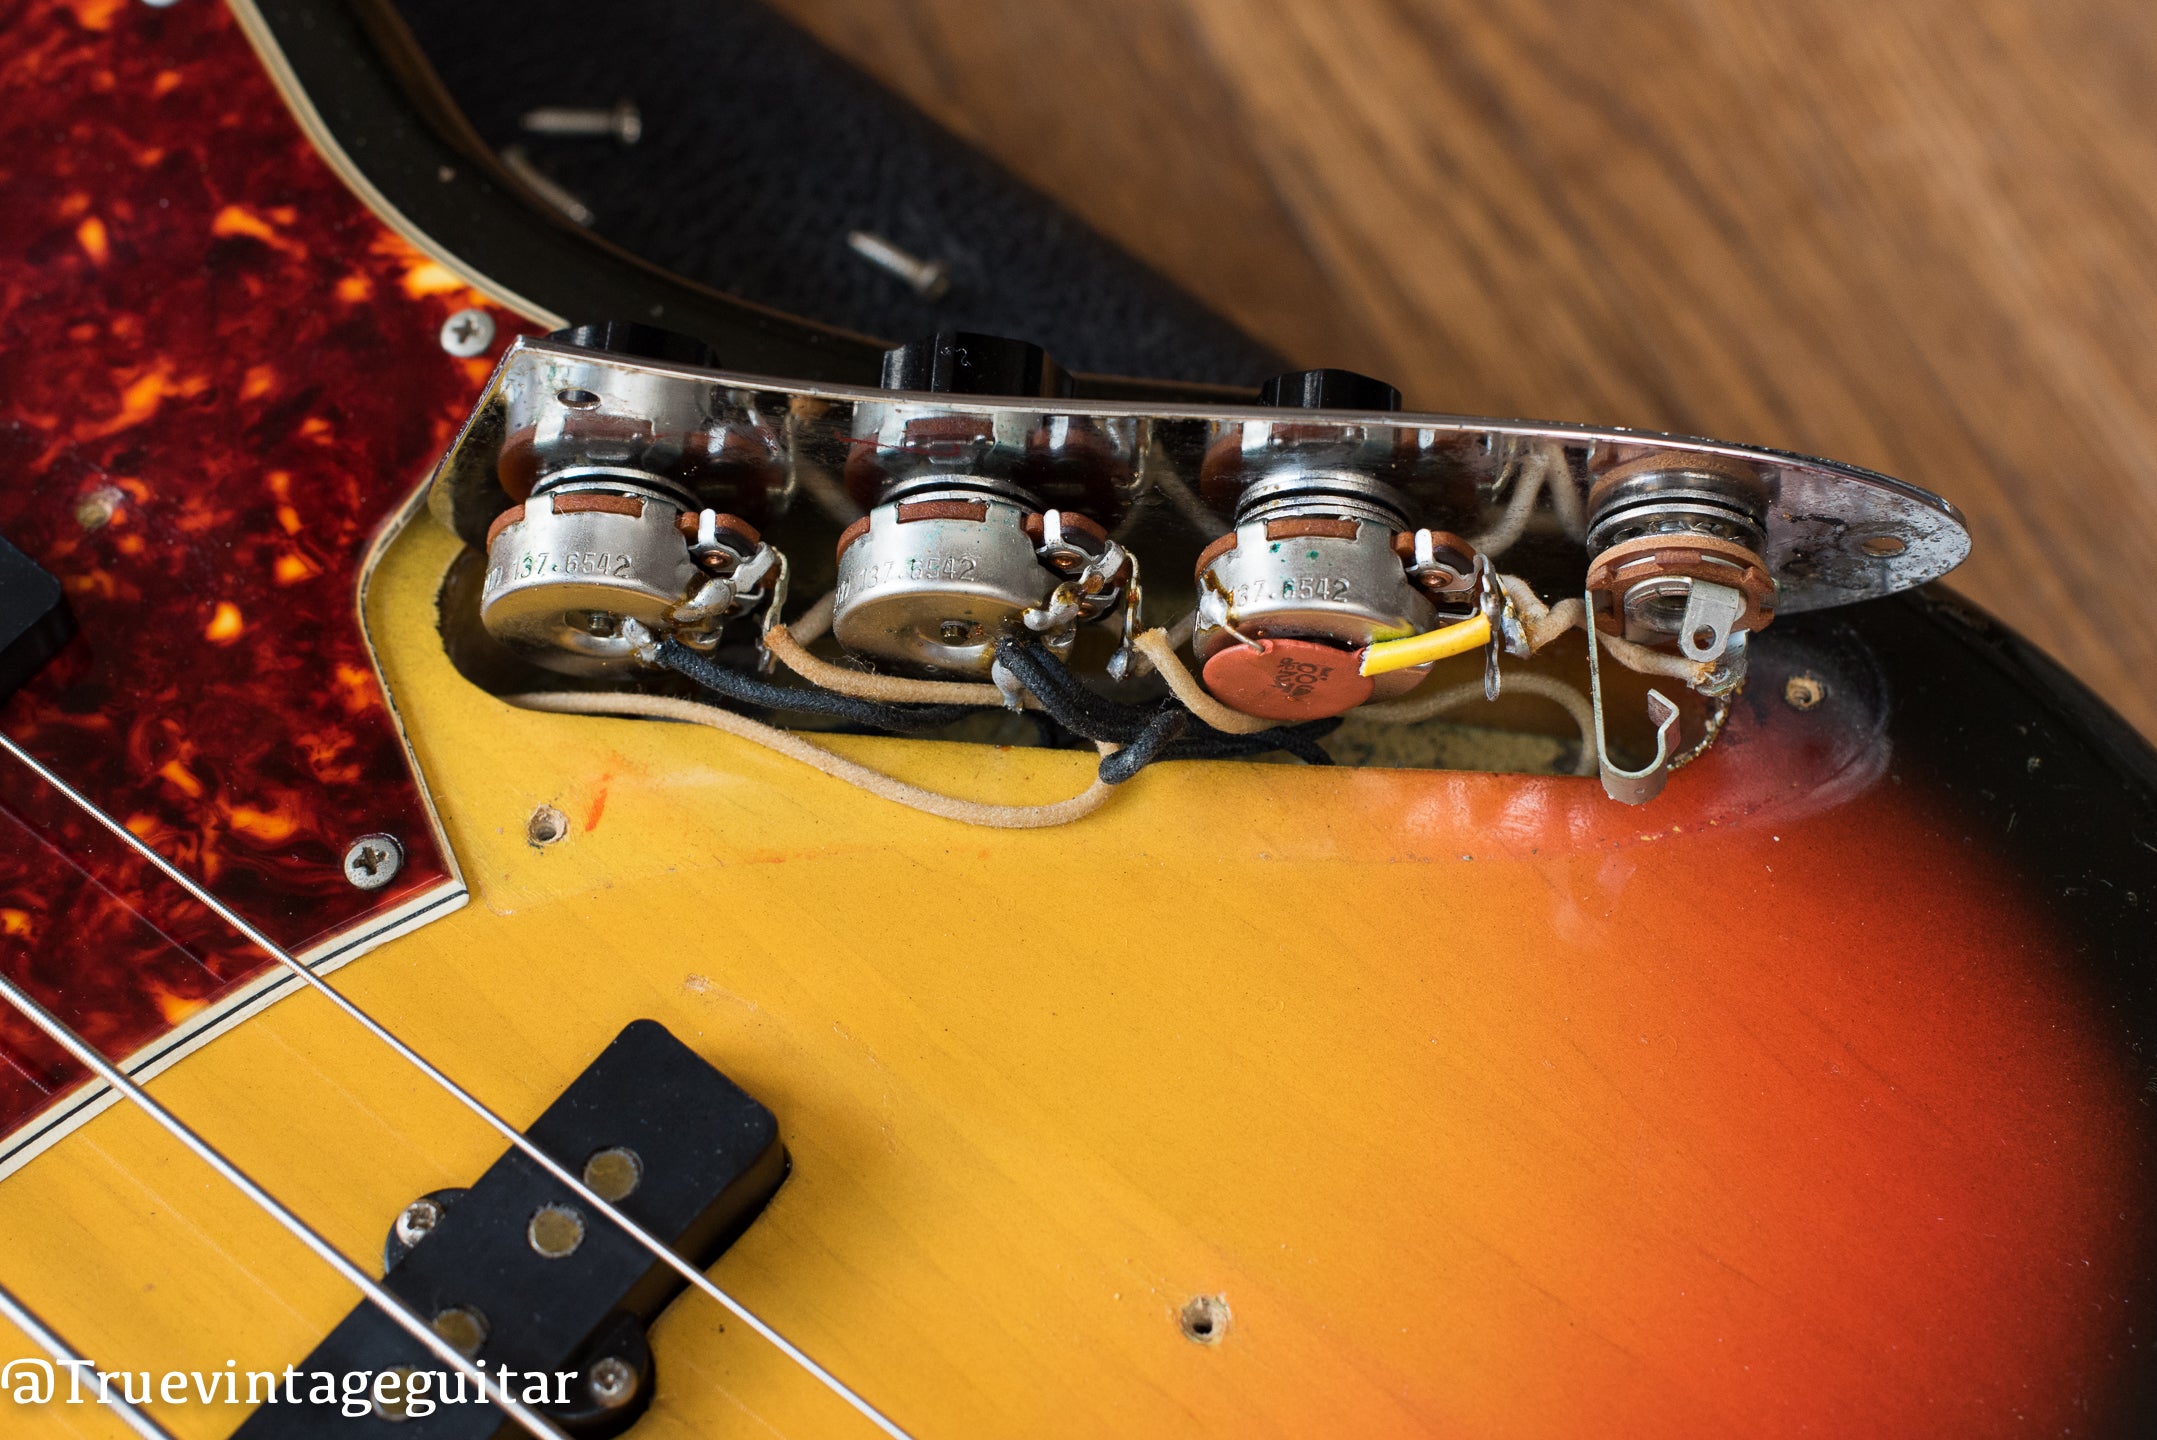 How to date vintage Fender guitar with potentiometer codes